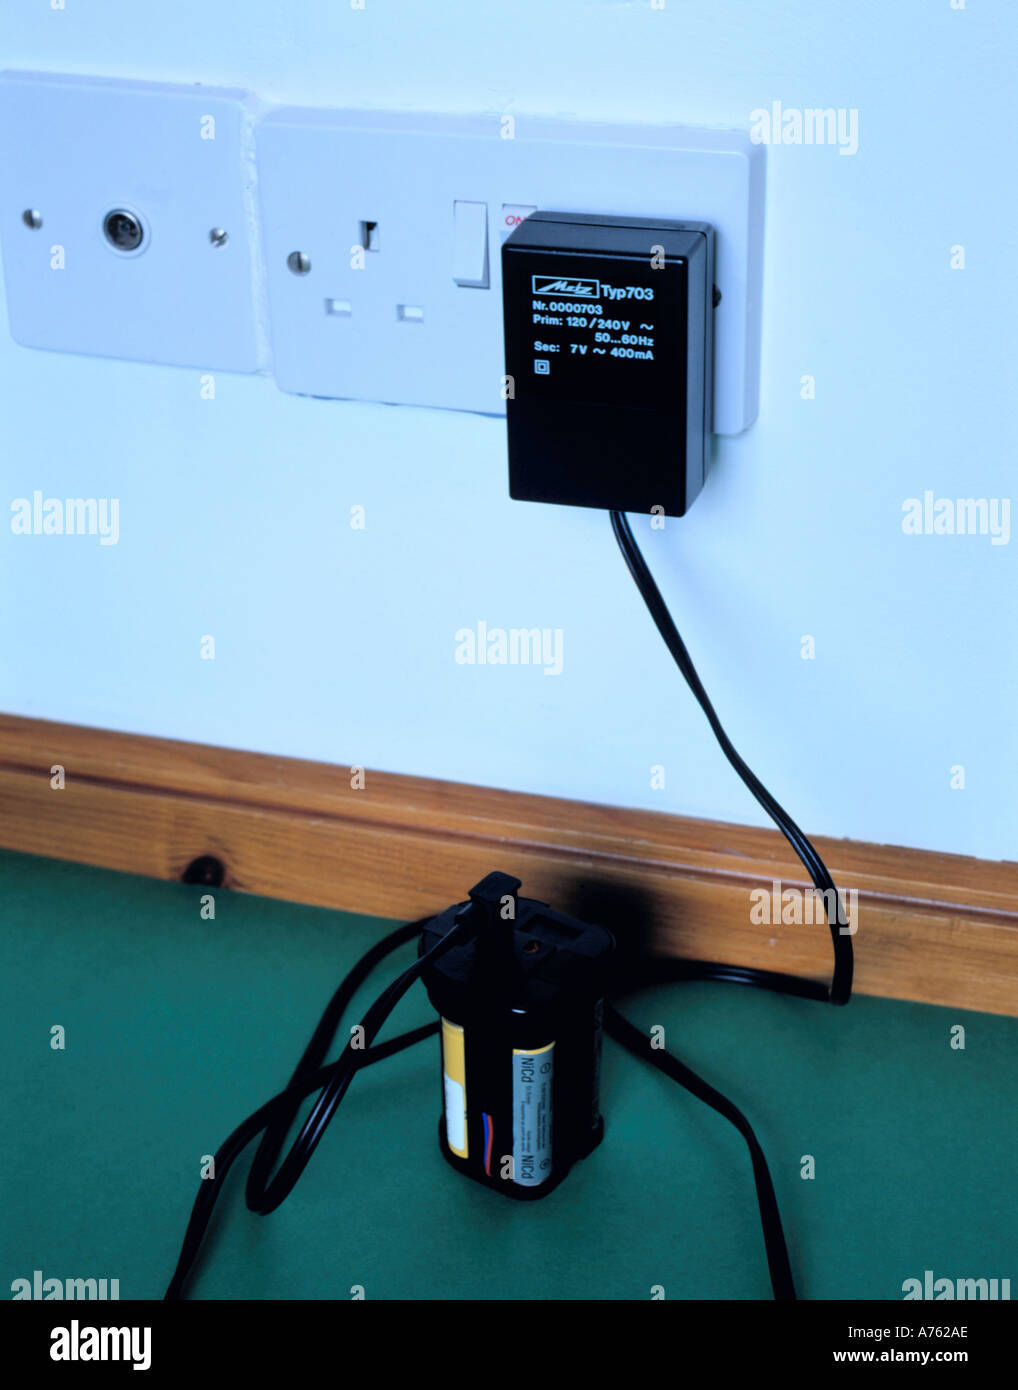 Recharging NiCad batteries from the mains using a small transformer to reduce voltage from 240 to 7 volts, England, UK. Stock Photo